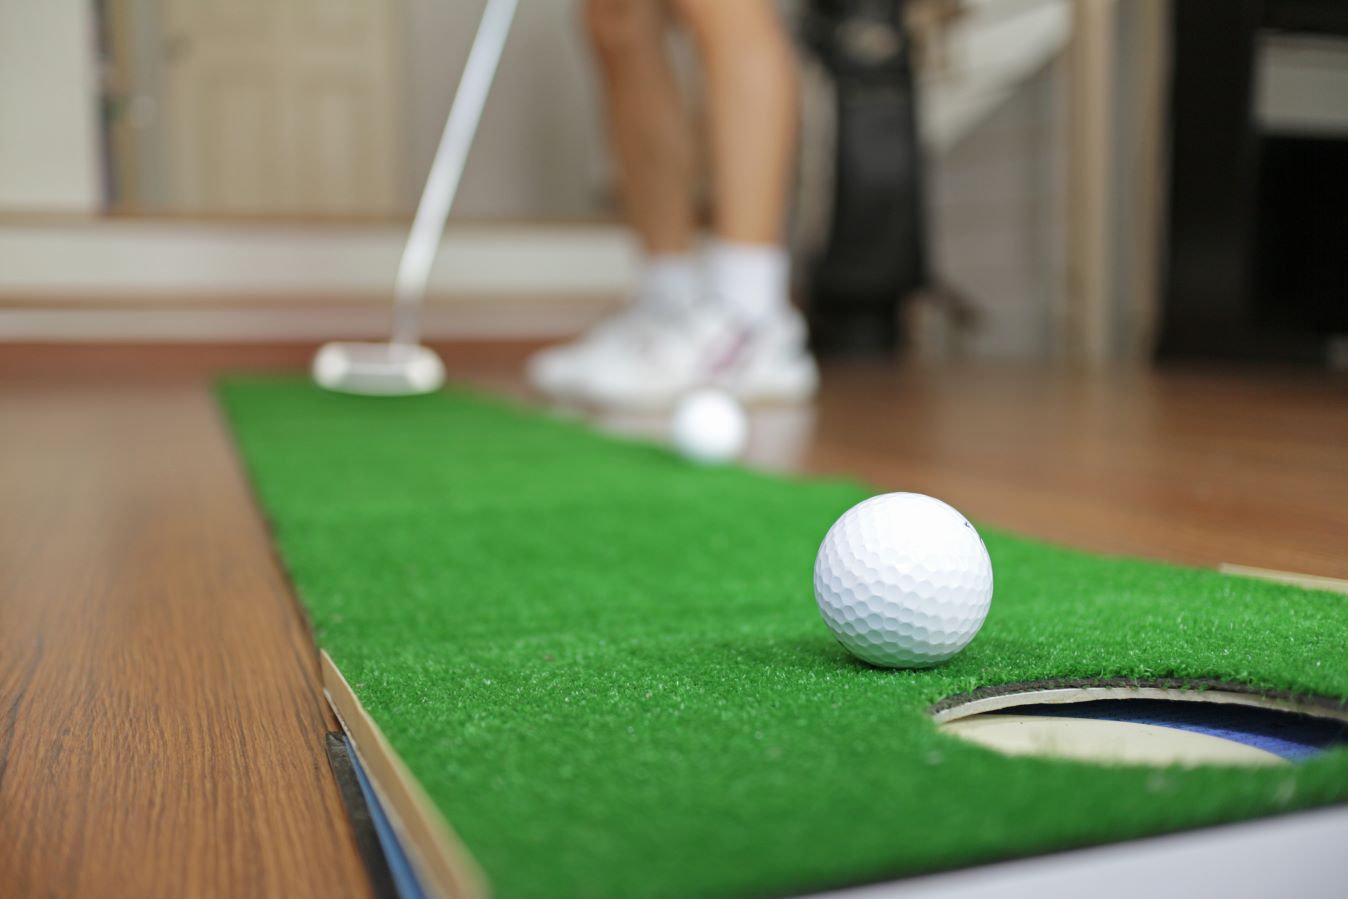 A golfer using a putting mat to practice golf at home.